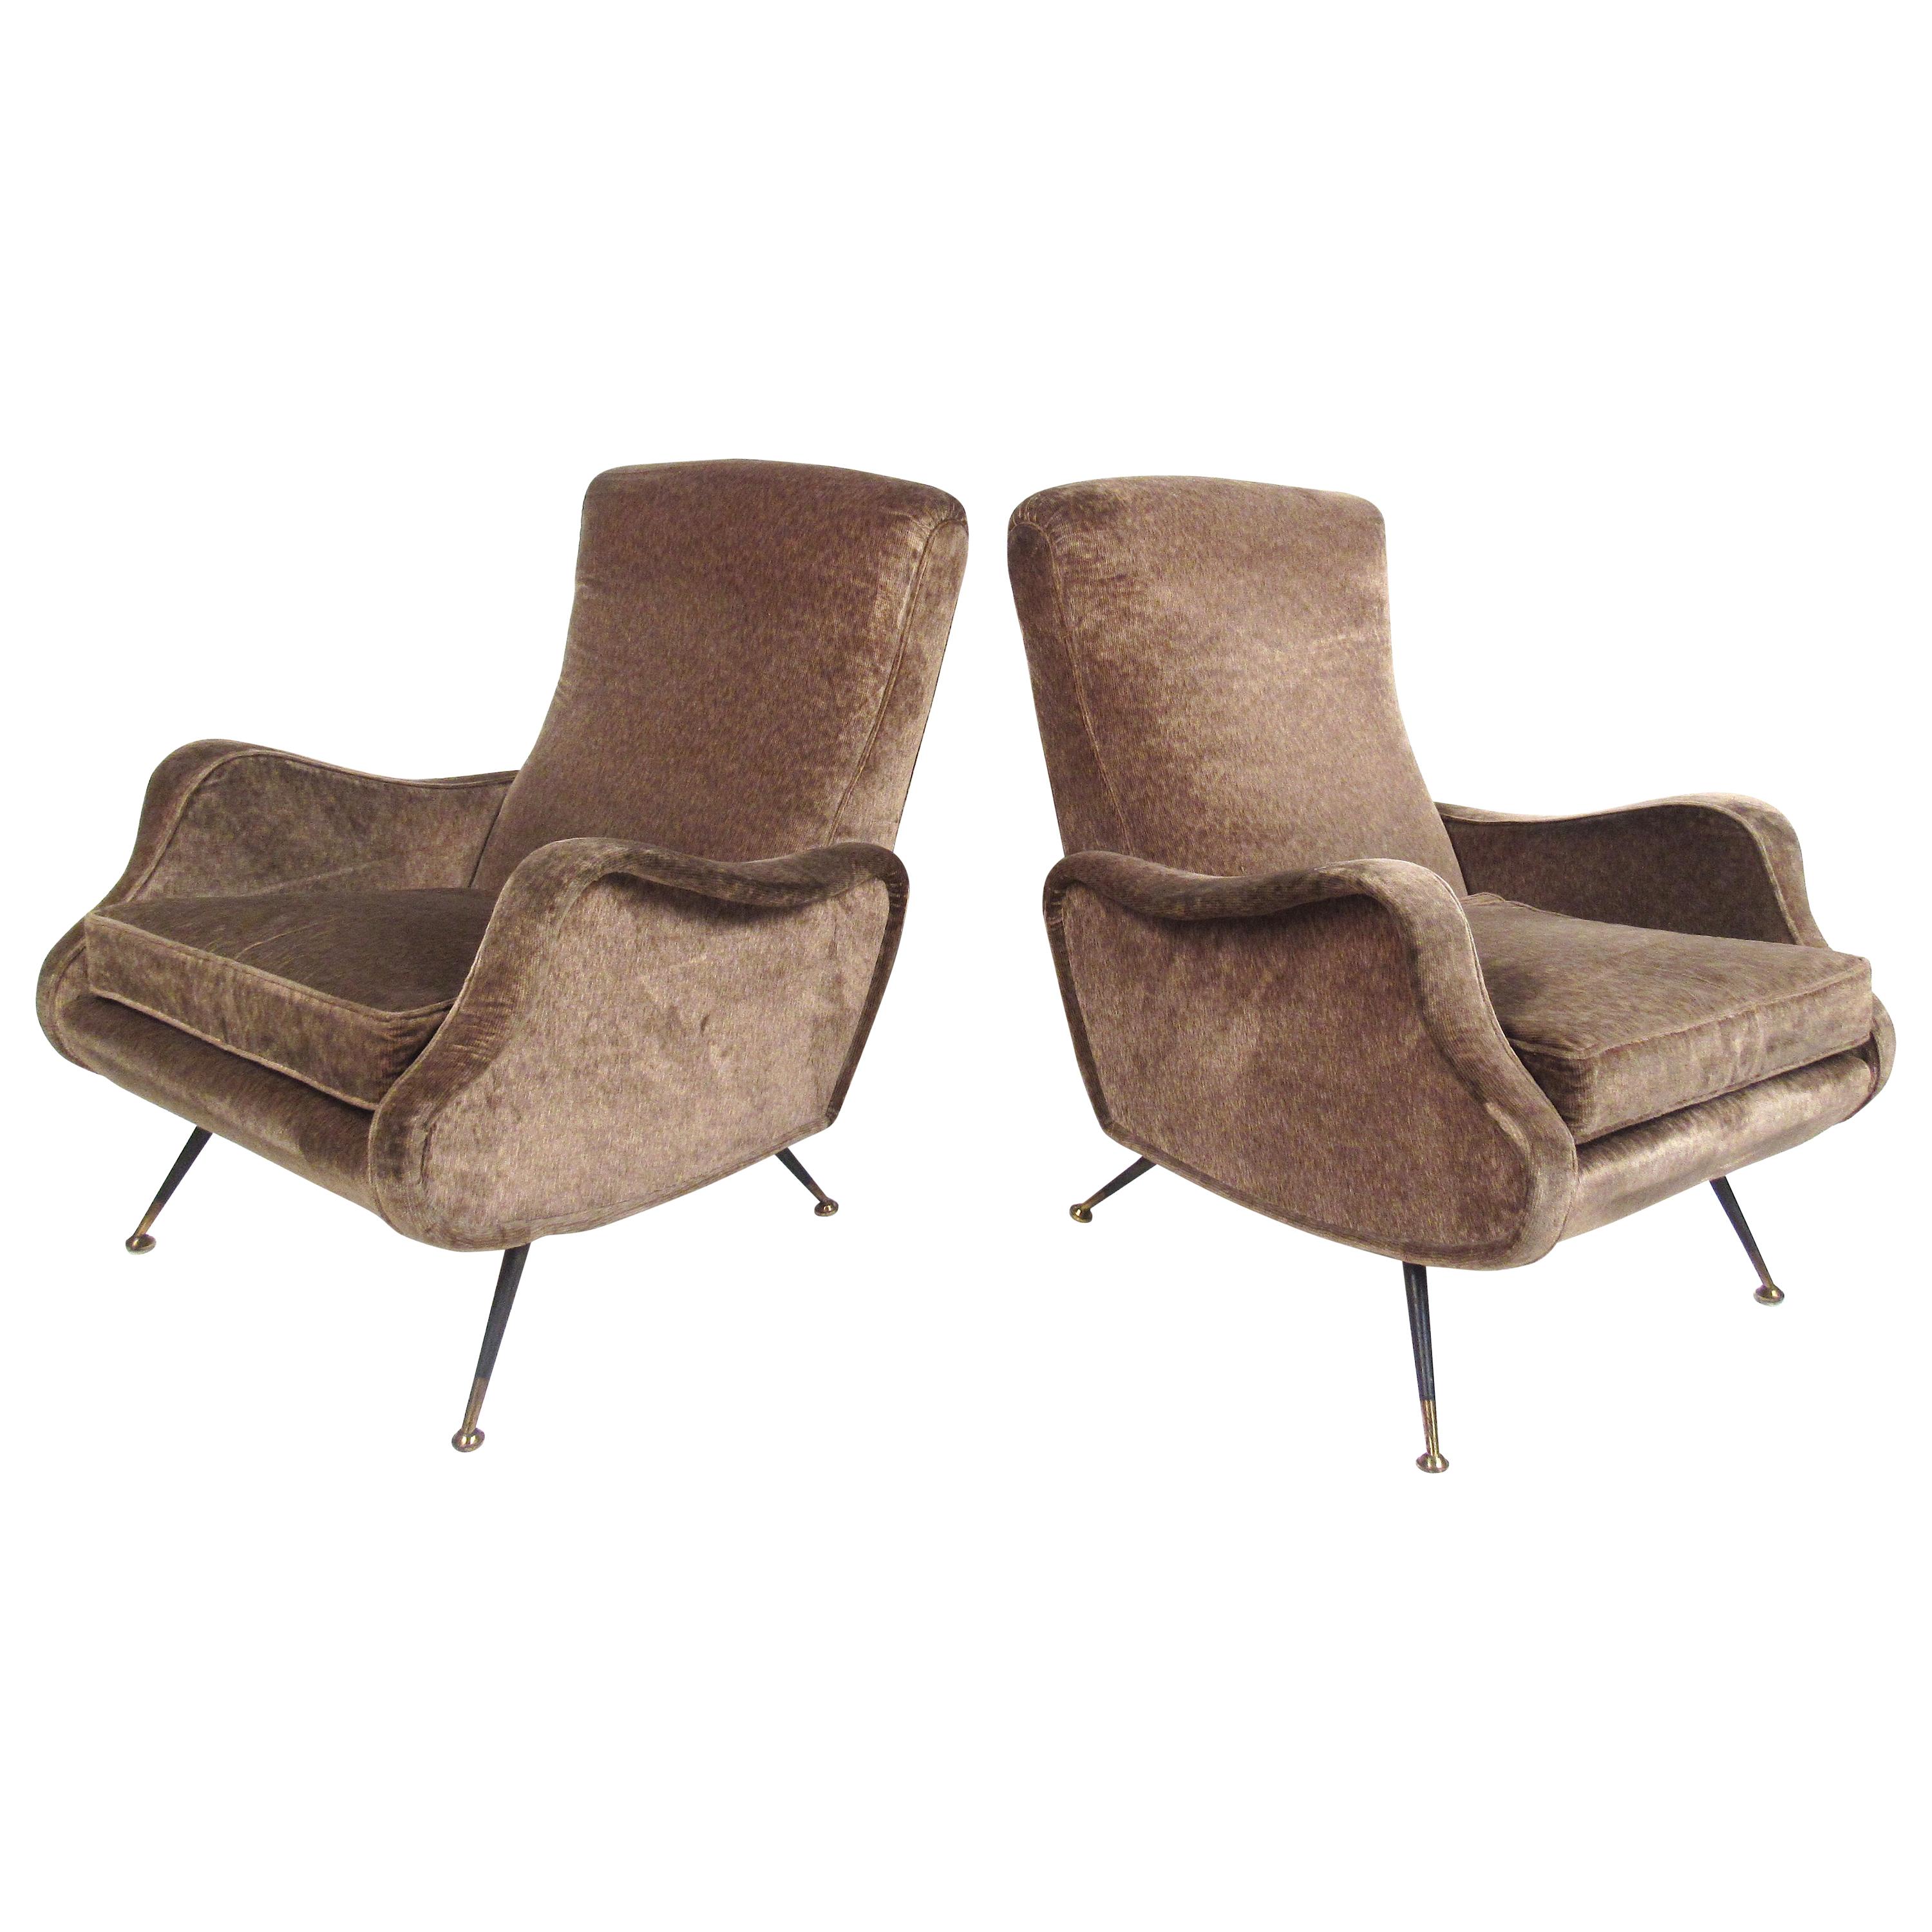 Pair of Italian Lounge Chairs after Marco Zanuso